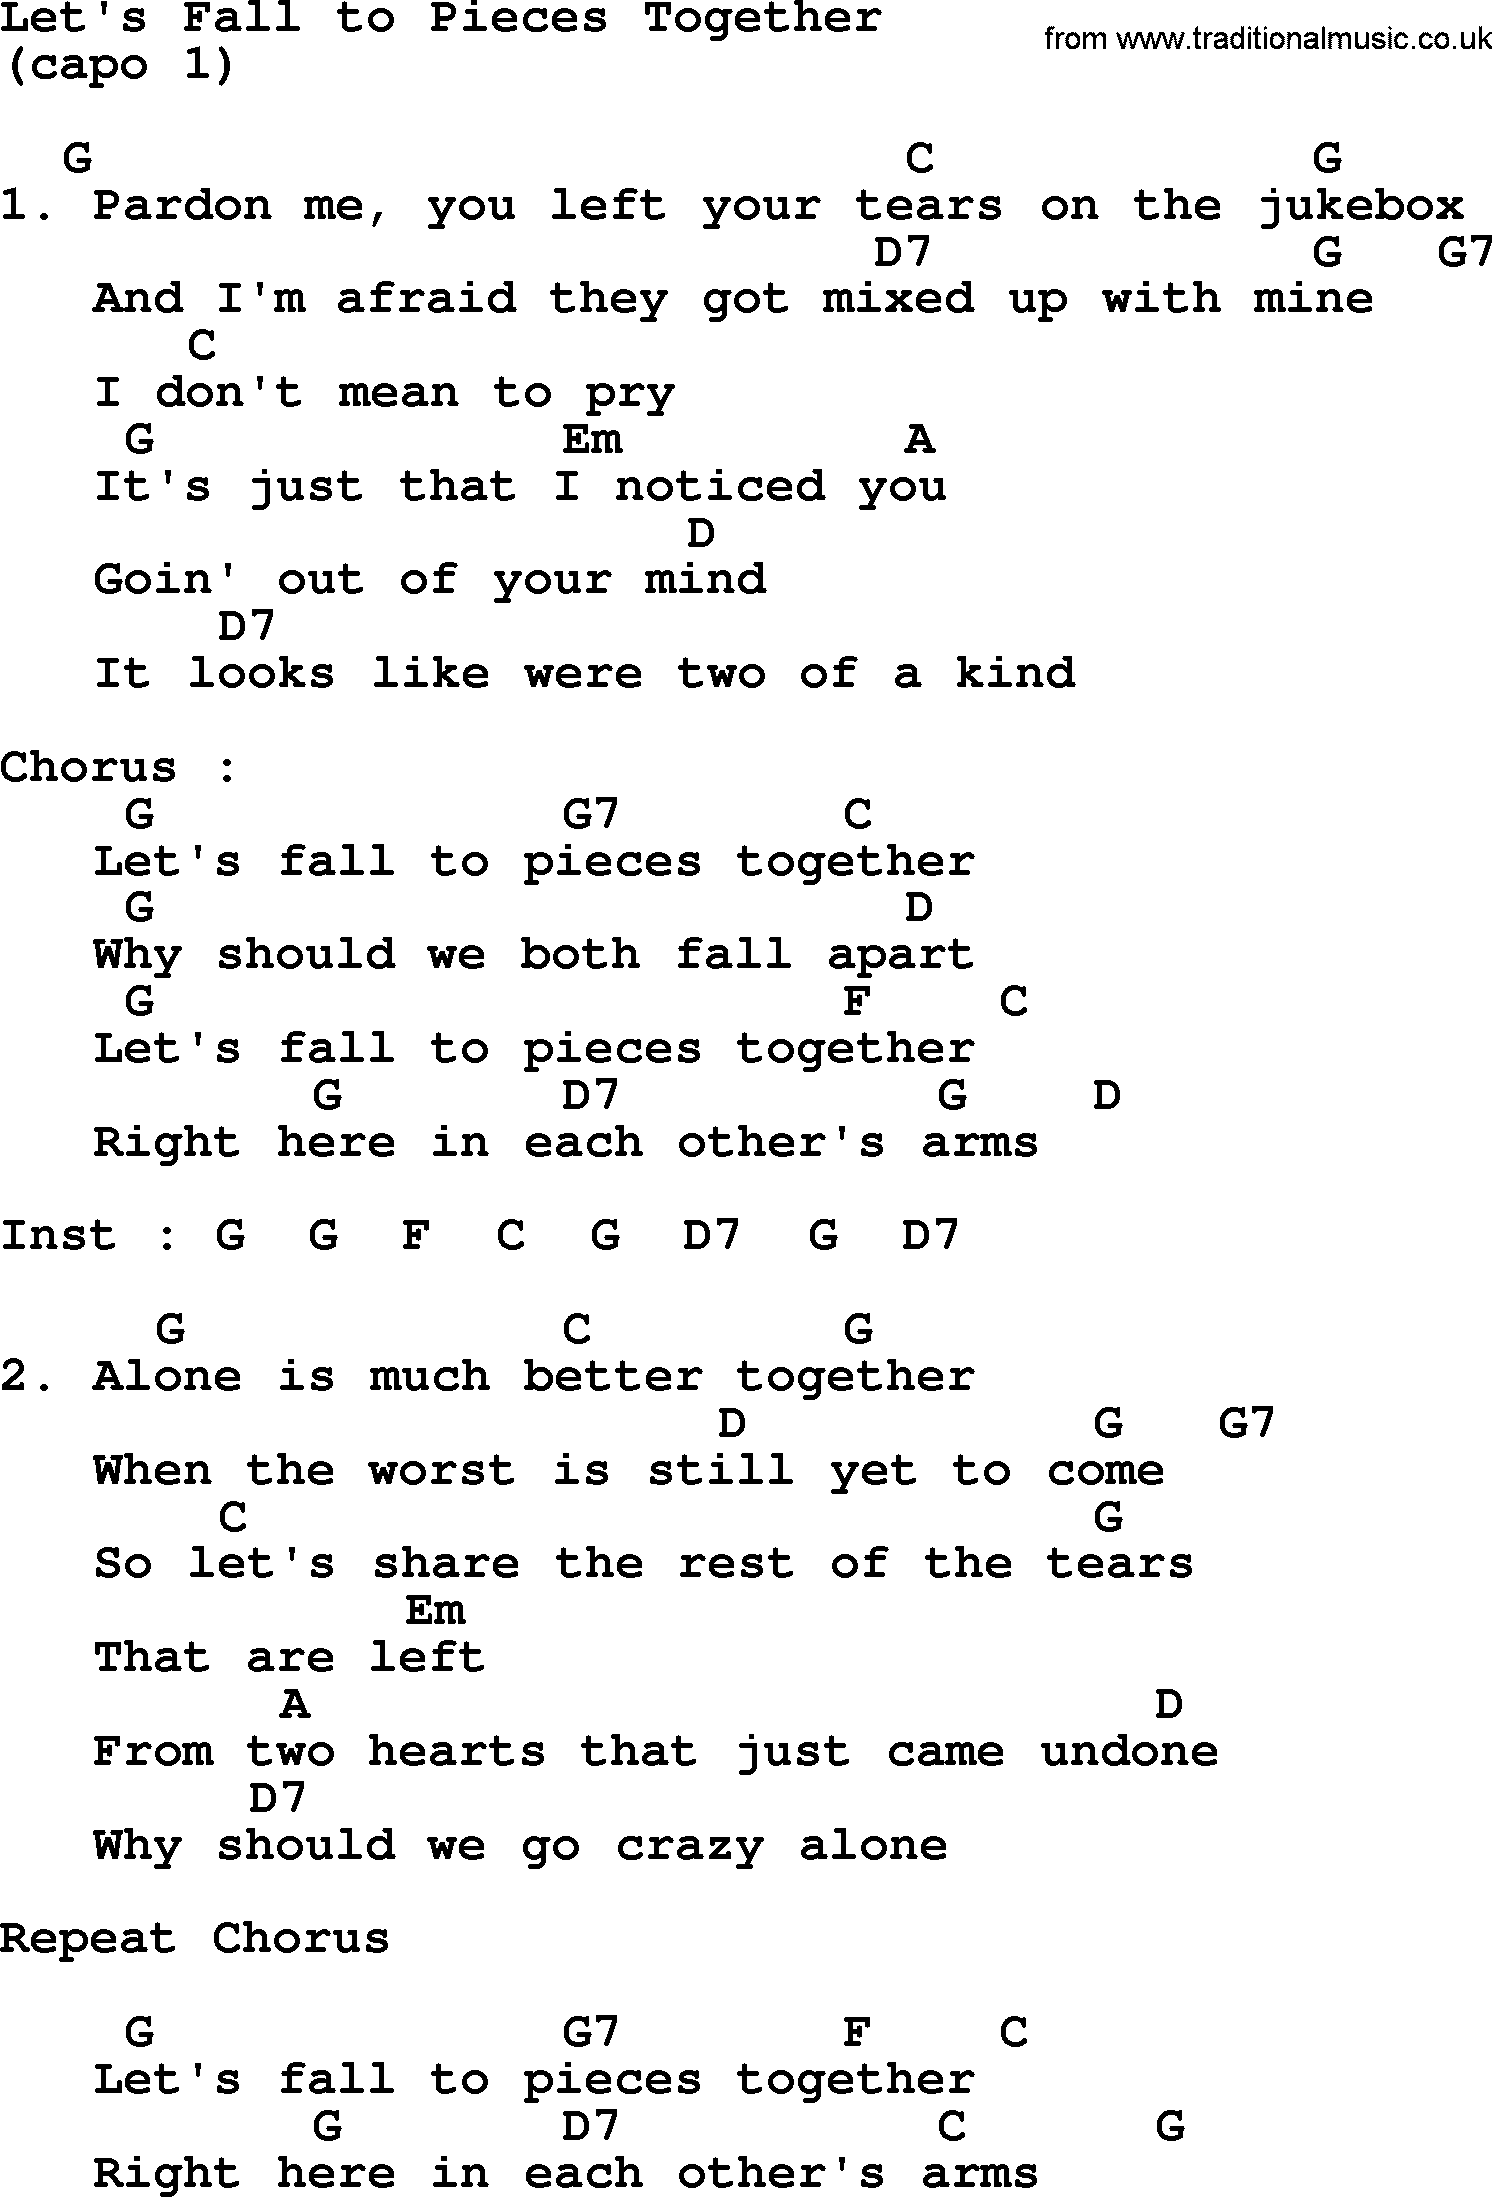 George Strait song: Let's Fall to Pieces Together, lyrics and chords